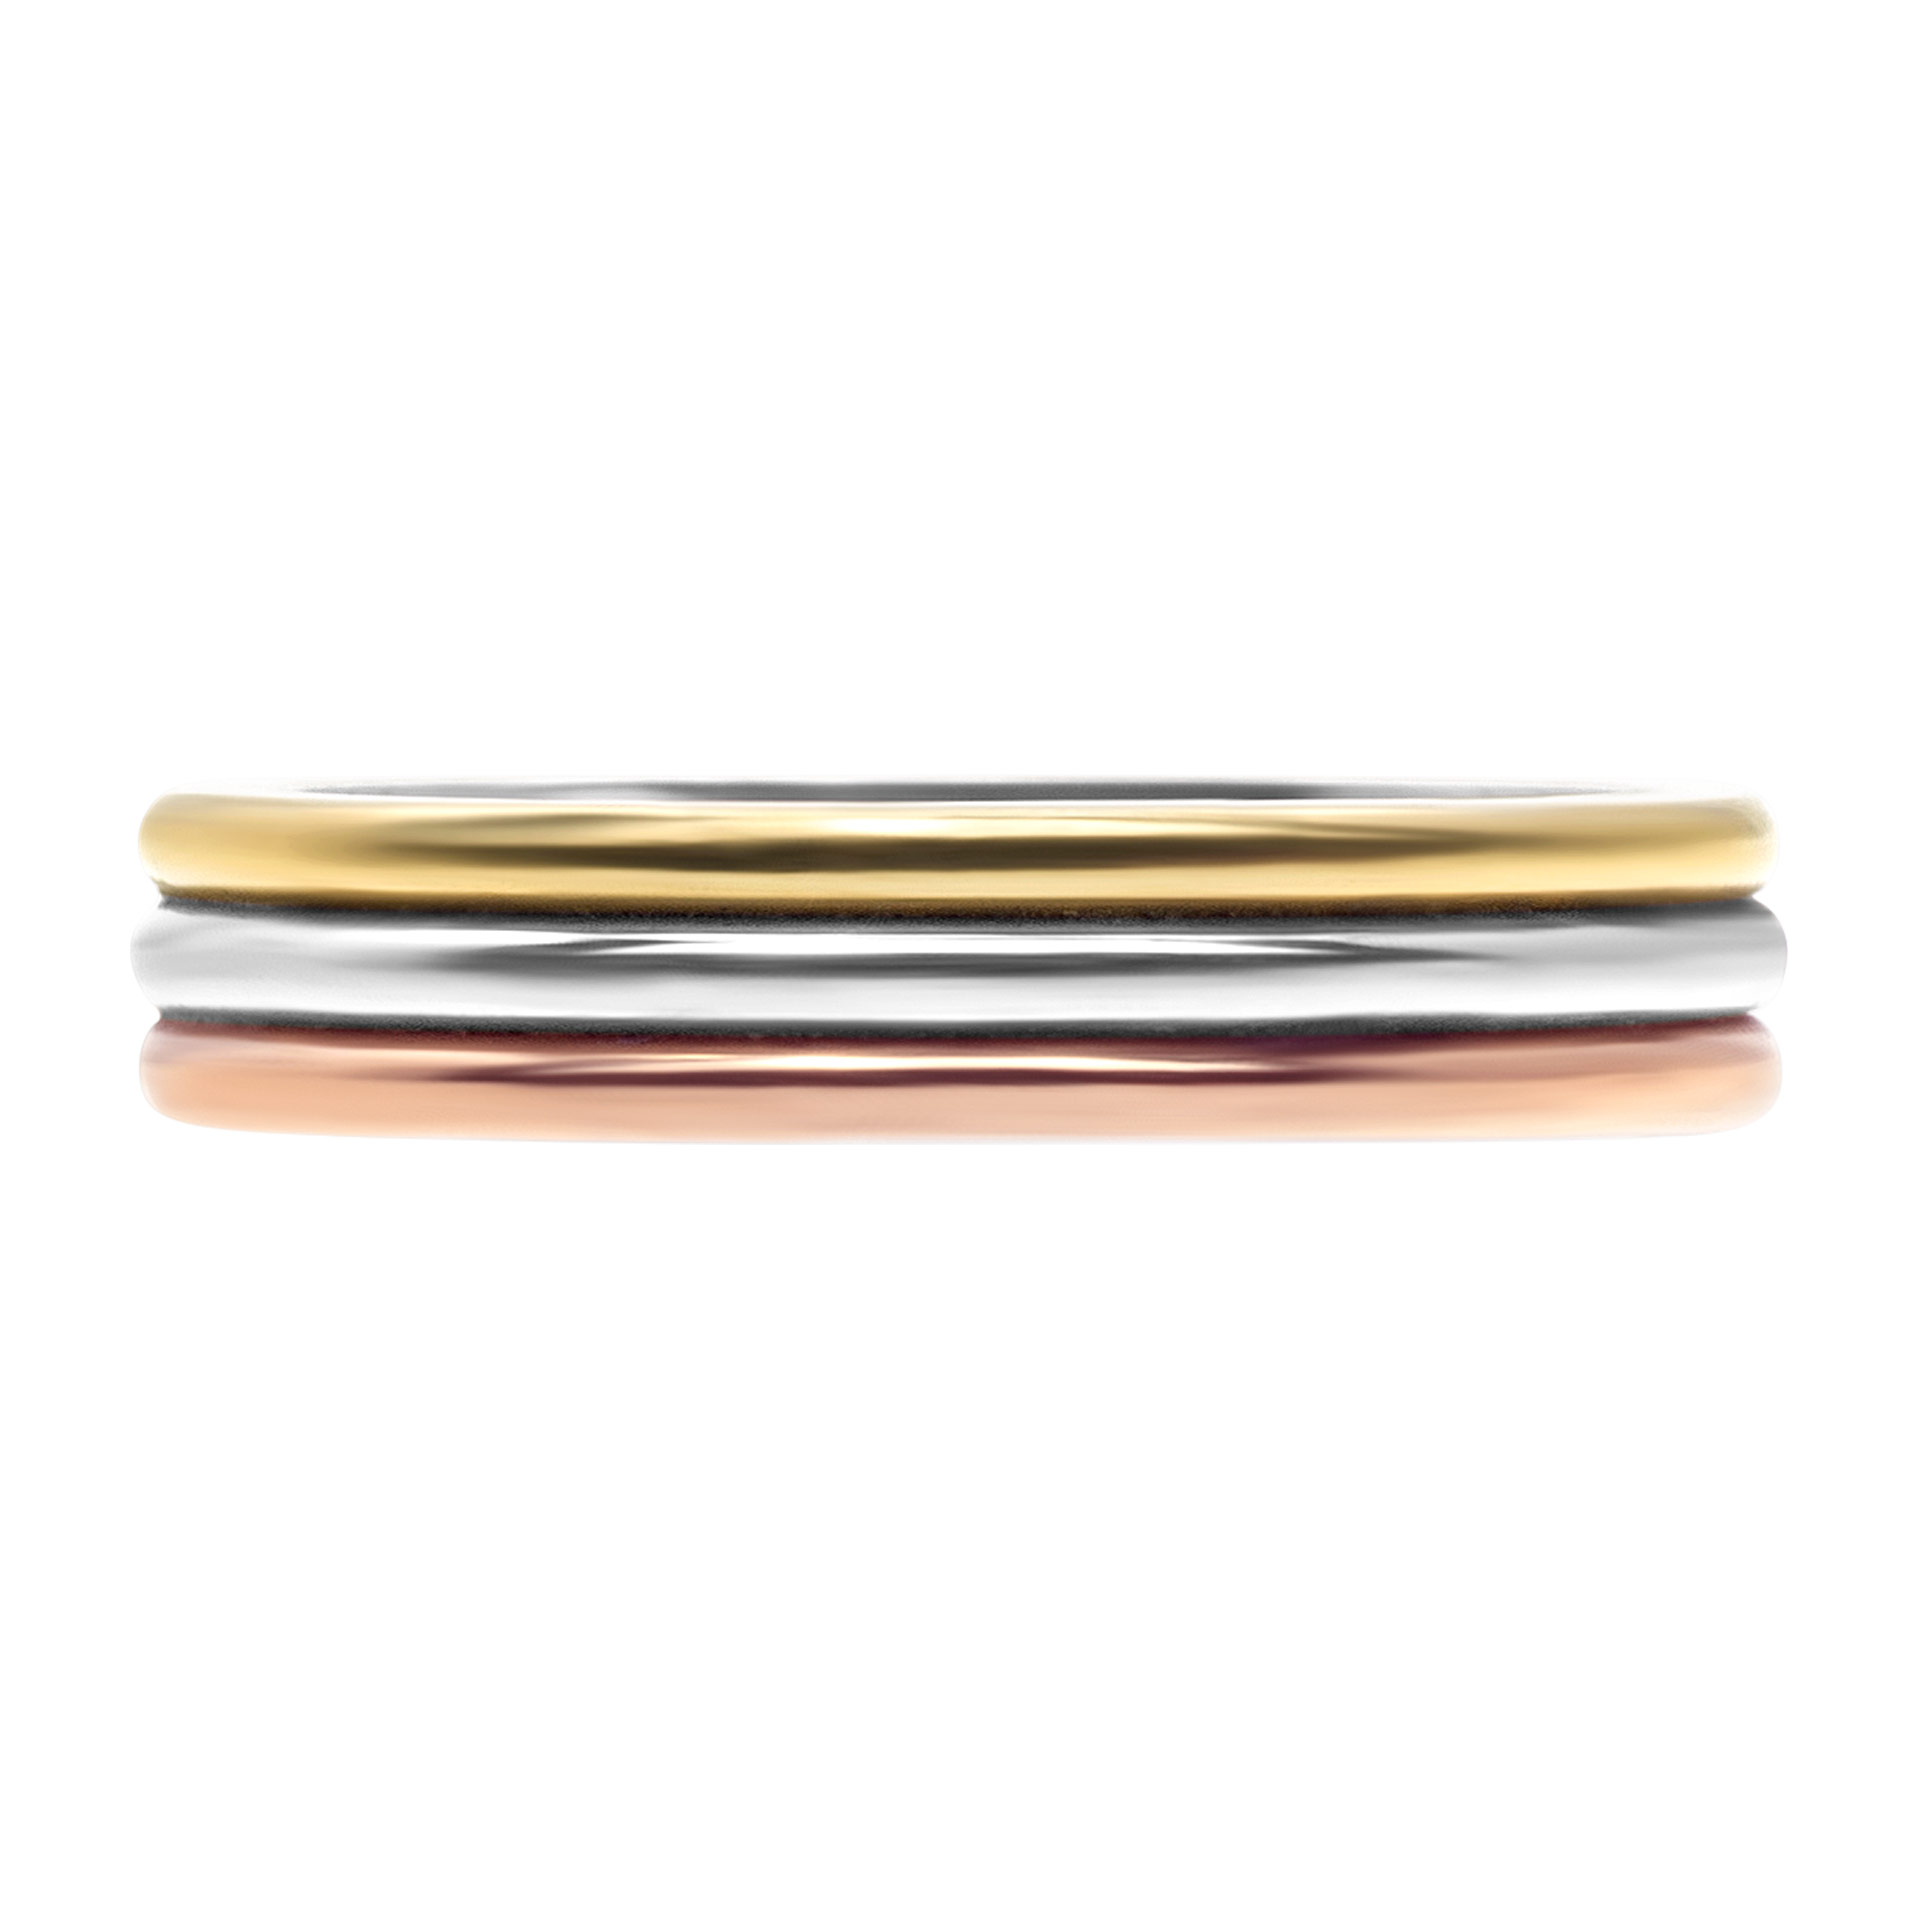 Cartier Trinity wedding band in in 18k white, yellow and rose gold image 1